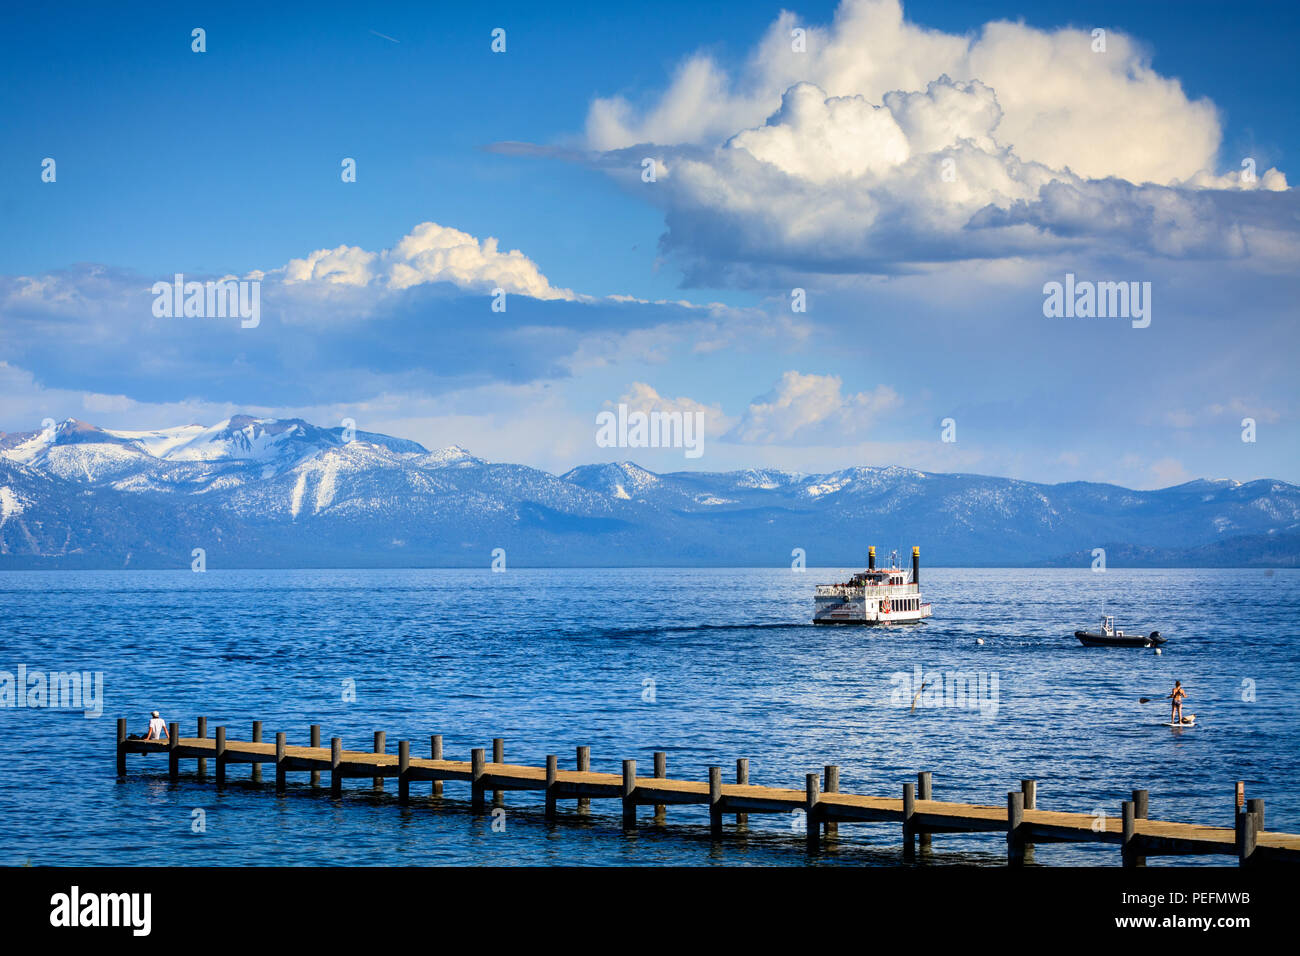 The scene from a pier in Tahoe City, California on a picturesque day at Lake Tahoe. Stock Photo